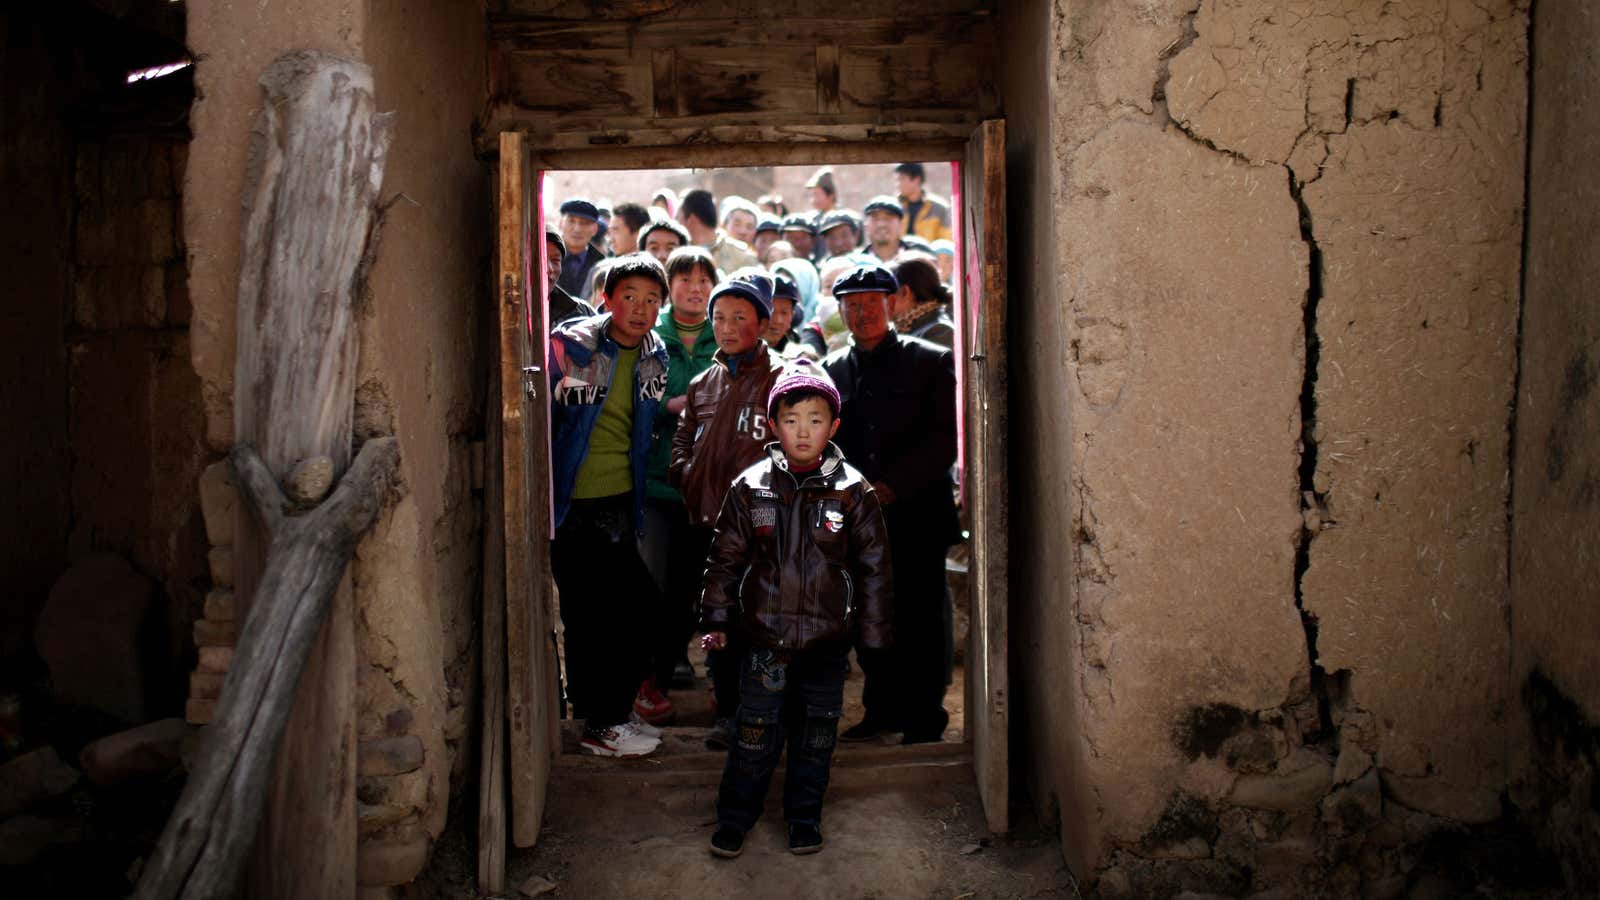 Villagers outside a house in Yuangudui, Gansu Province.